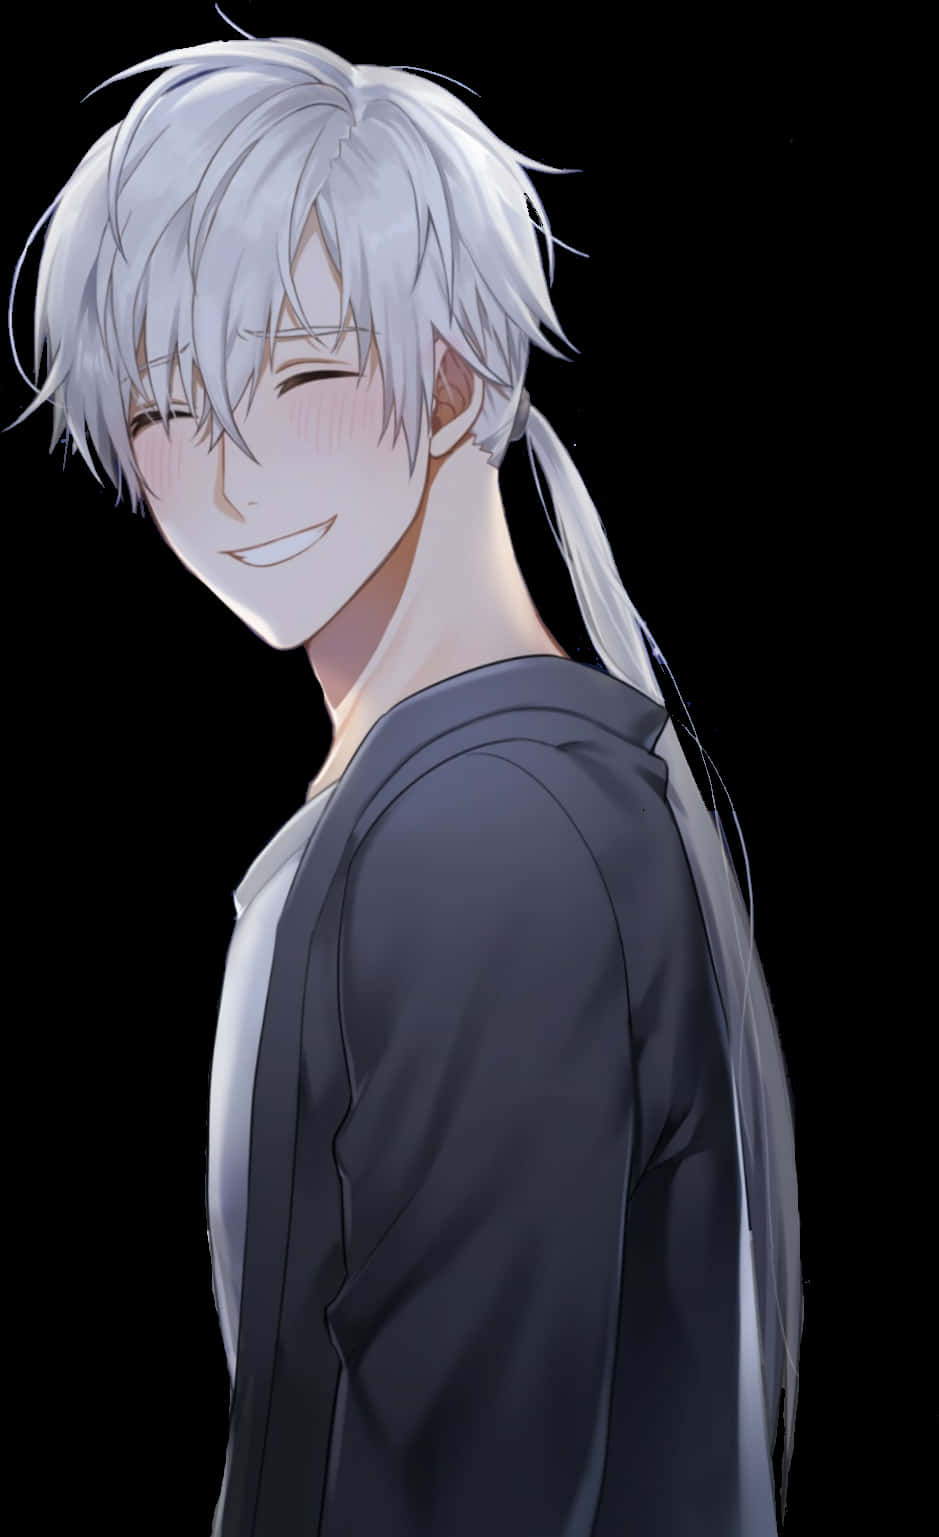 Smiling Silver Haired Anime Boy PNG